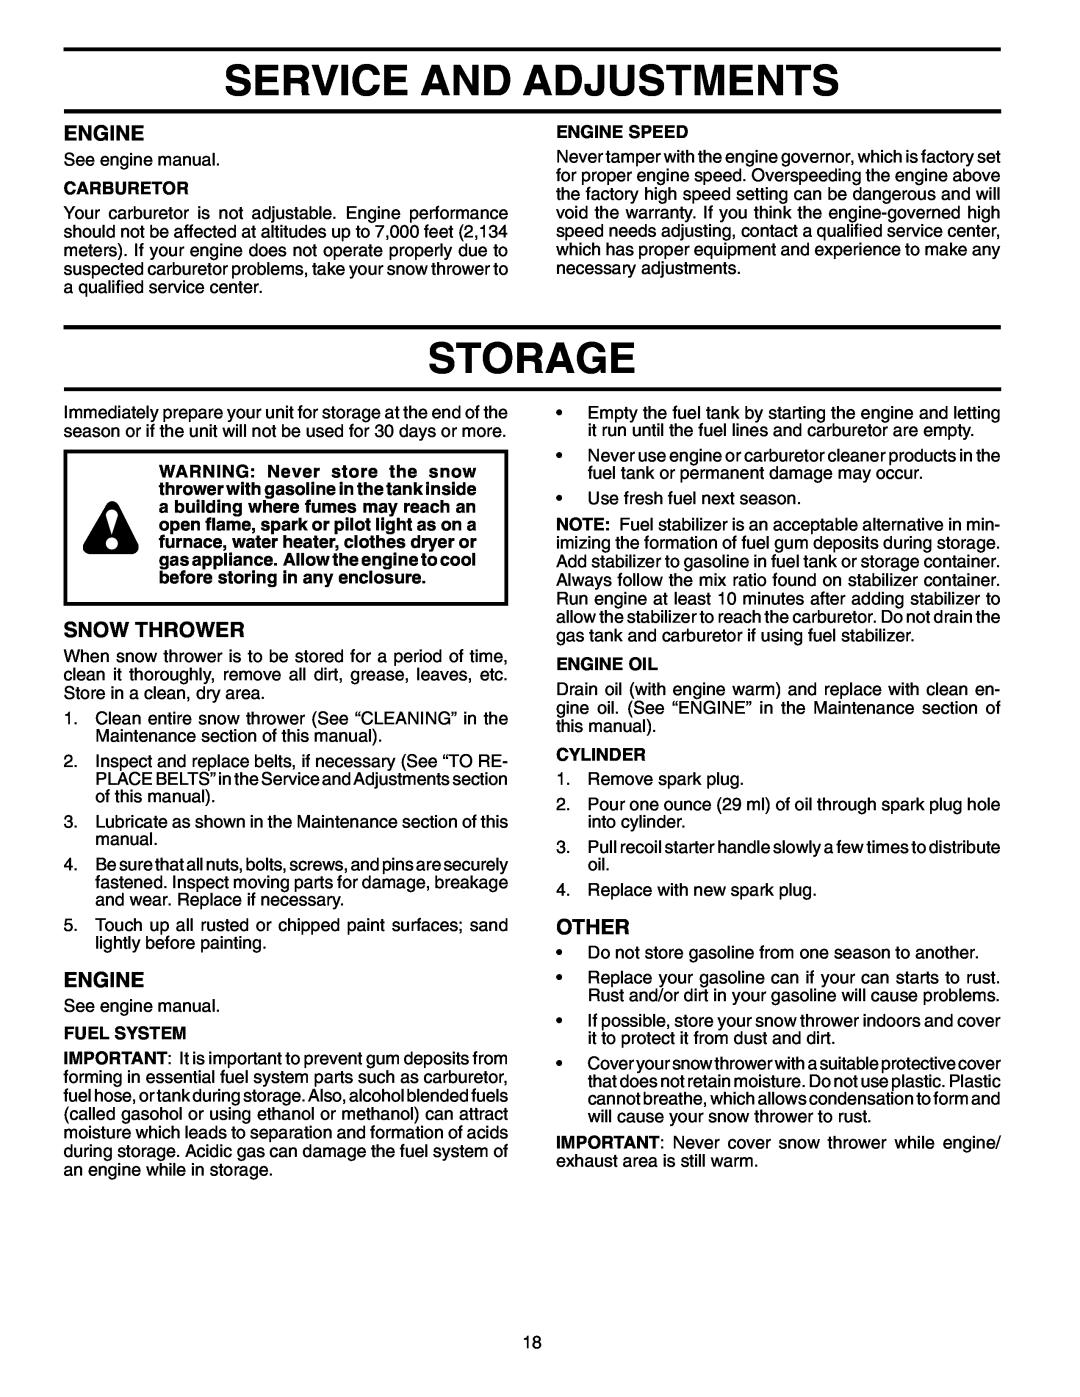 Poulan PO927ES owner manual Storage, Other, Service And Adjustments, Engine, Snow Thrower 